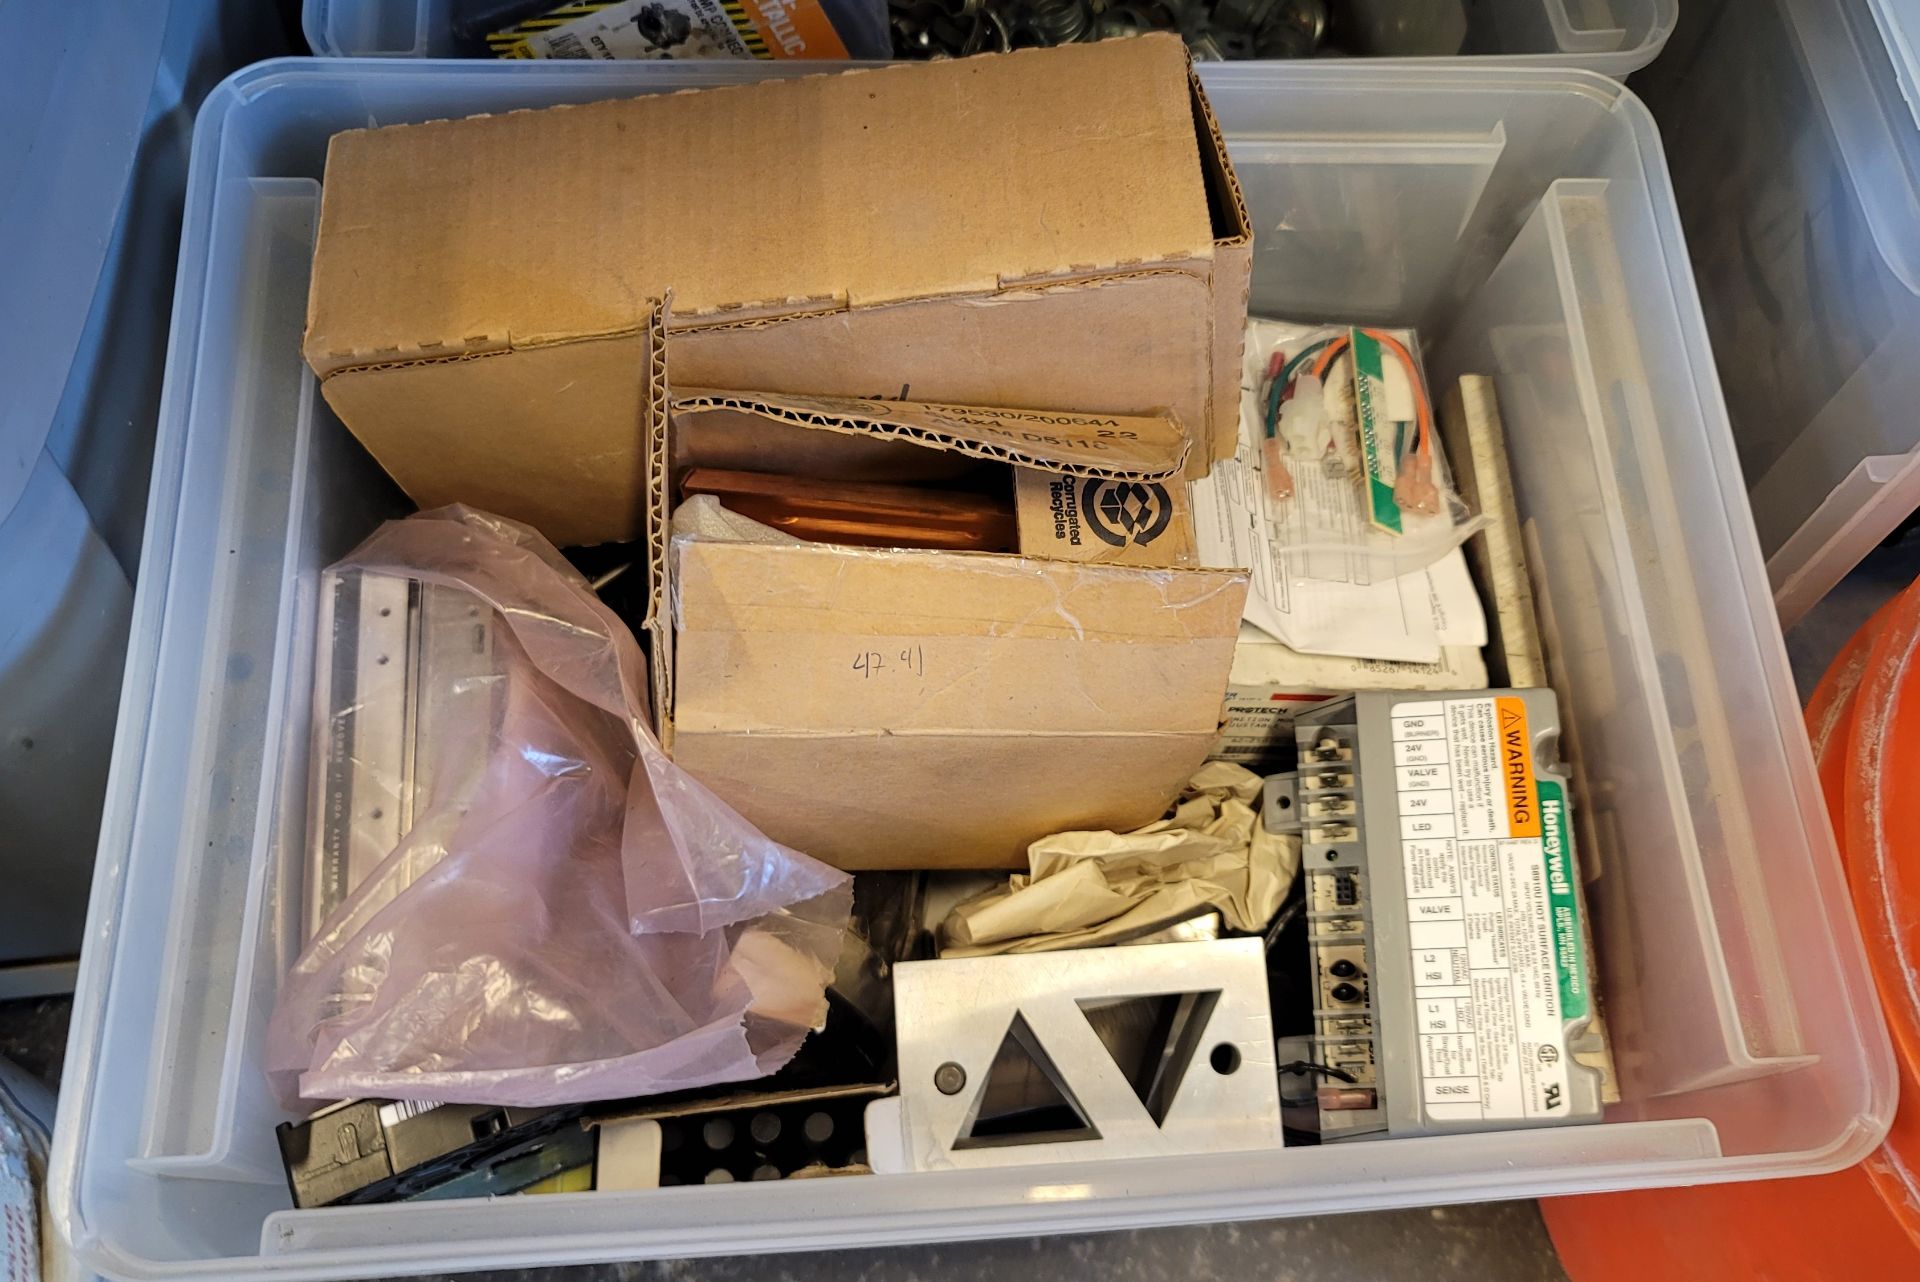 LOT - LARGE AMOUNT OF ELECTRICAL ITEMS: COVERPLATES, CONDIT CONNECTORS & HANGERS, ETC. - Image 5 of 7